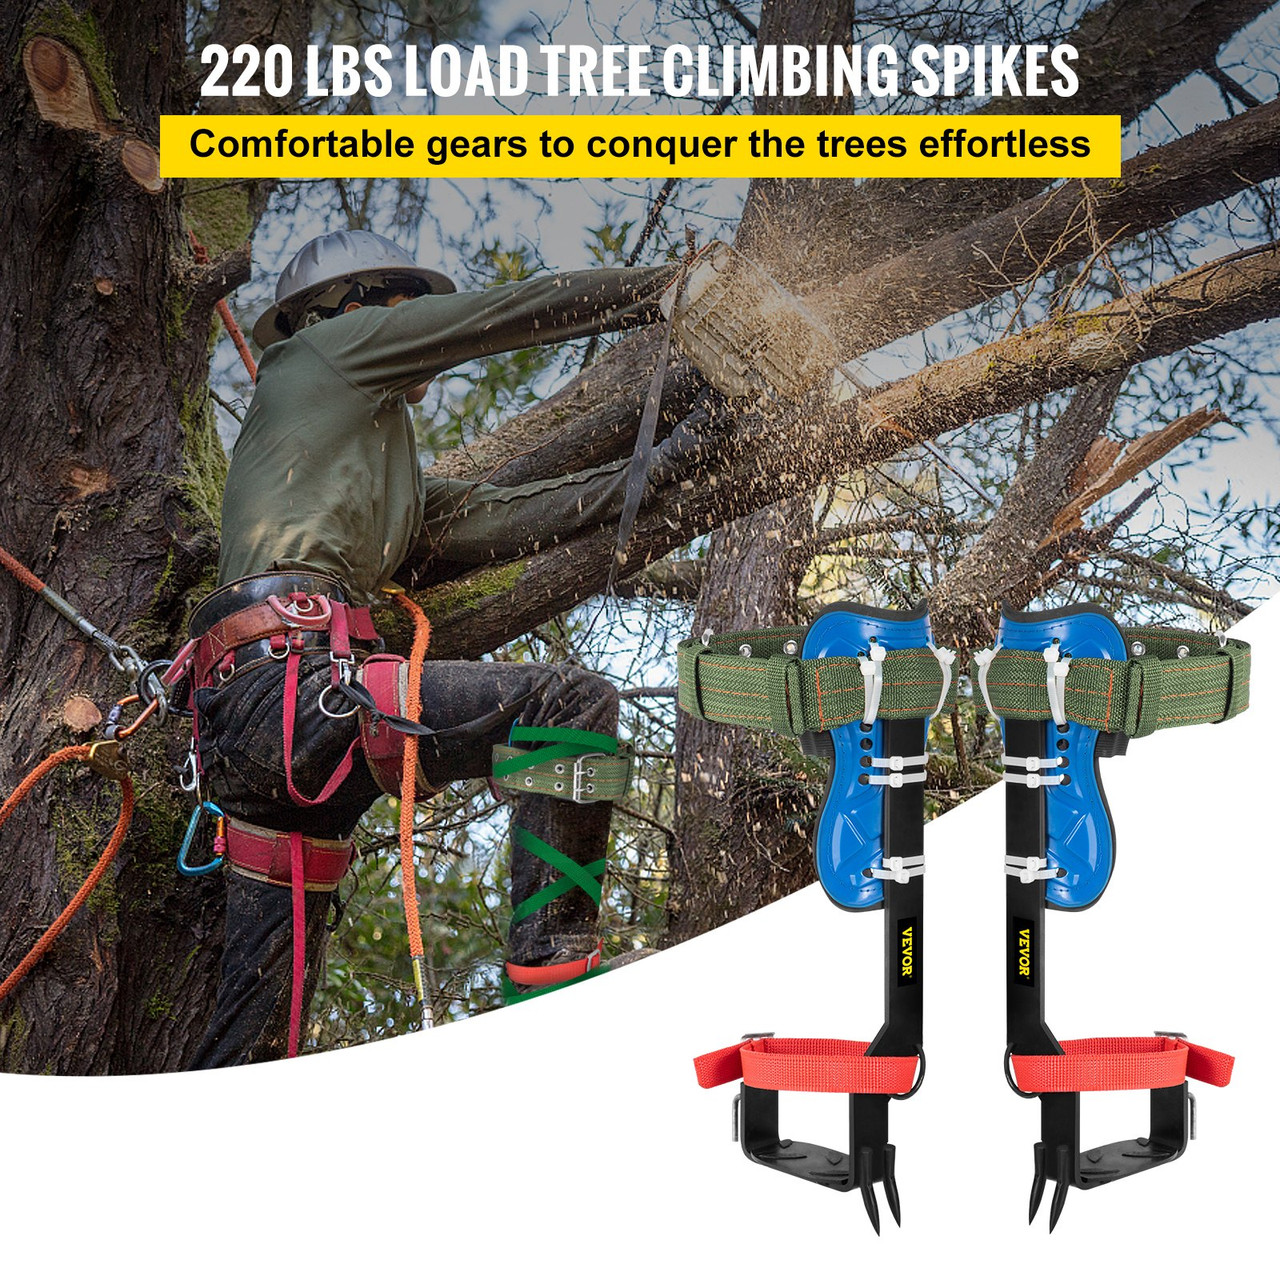 Tree Climbing Spikes, 4 in 1 Alloy Metal Adjustable Pole Climbing Spurs,  w/Security Belt & Foot Ankle Straps, Arborist Equipment for Climbers